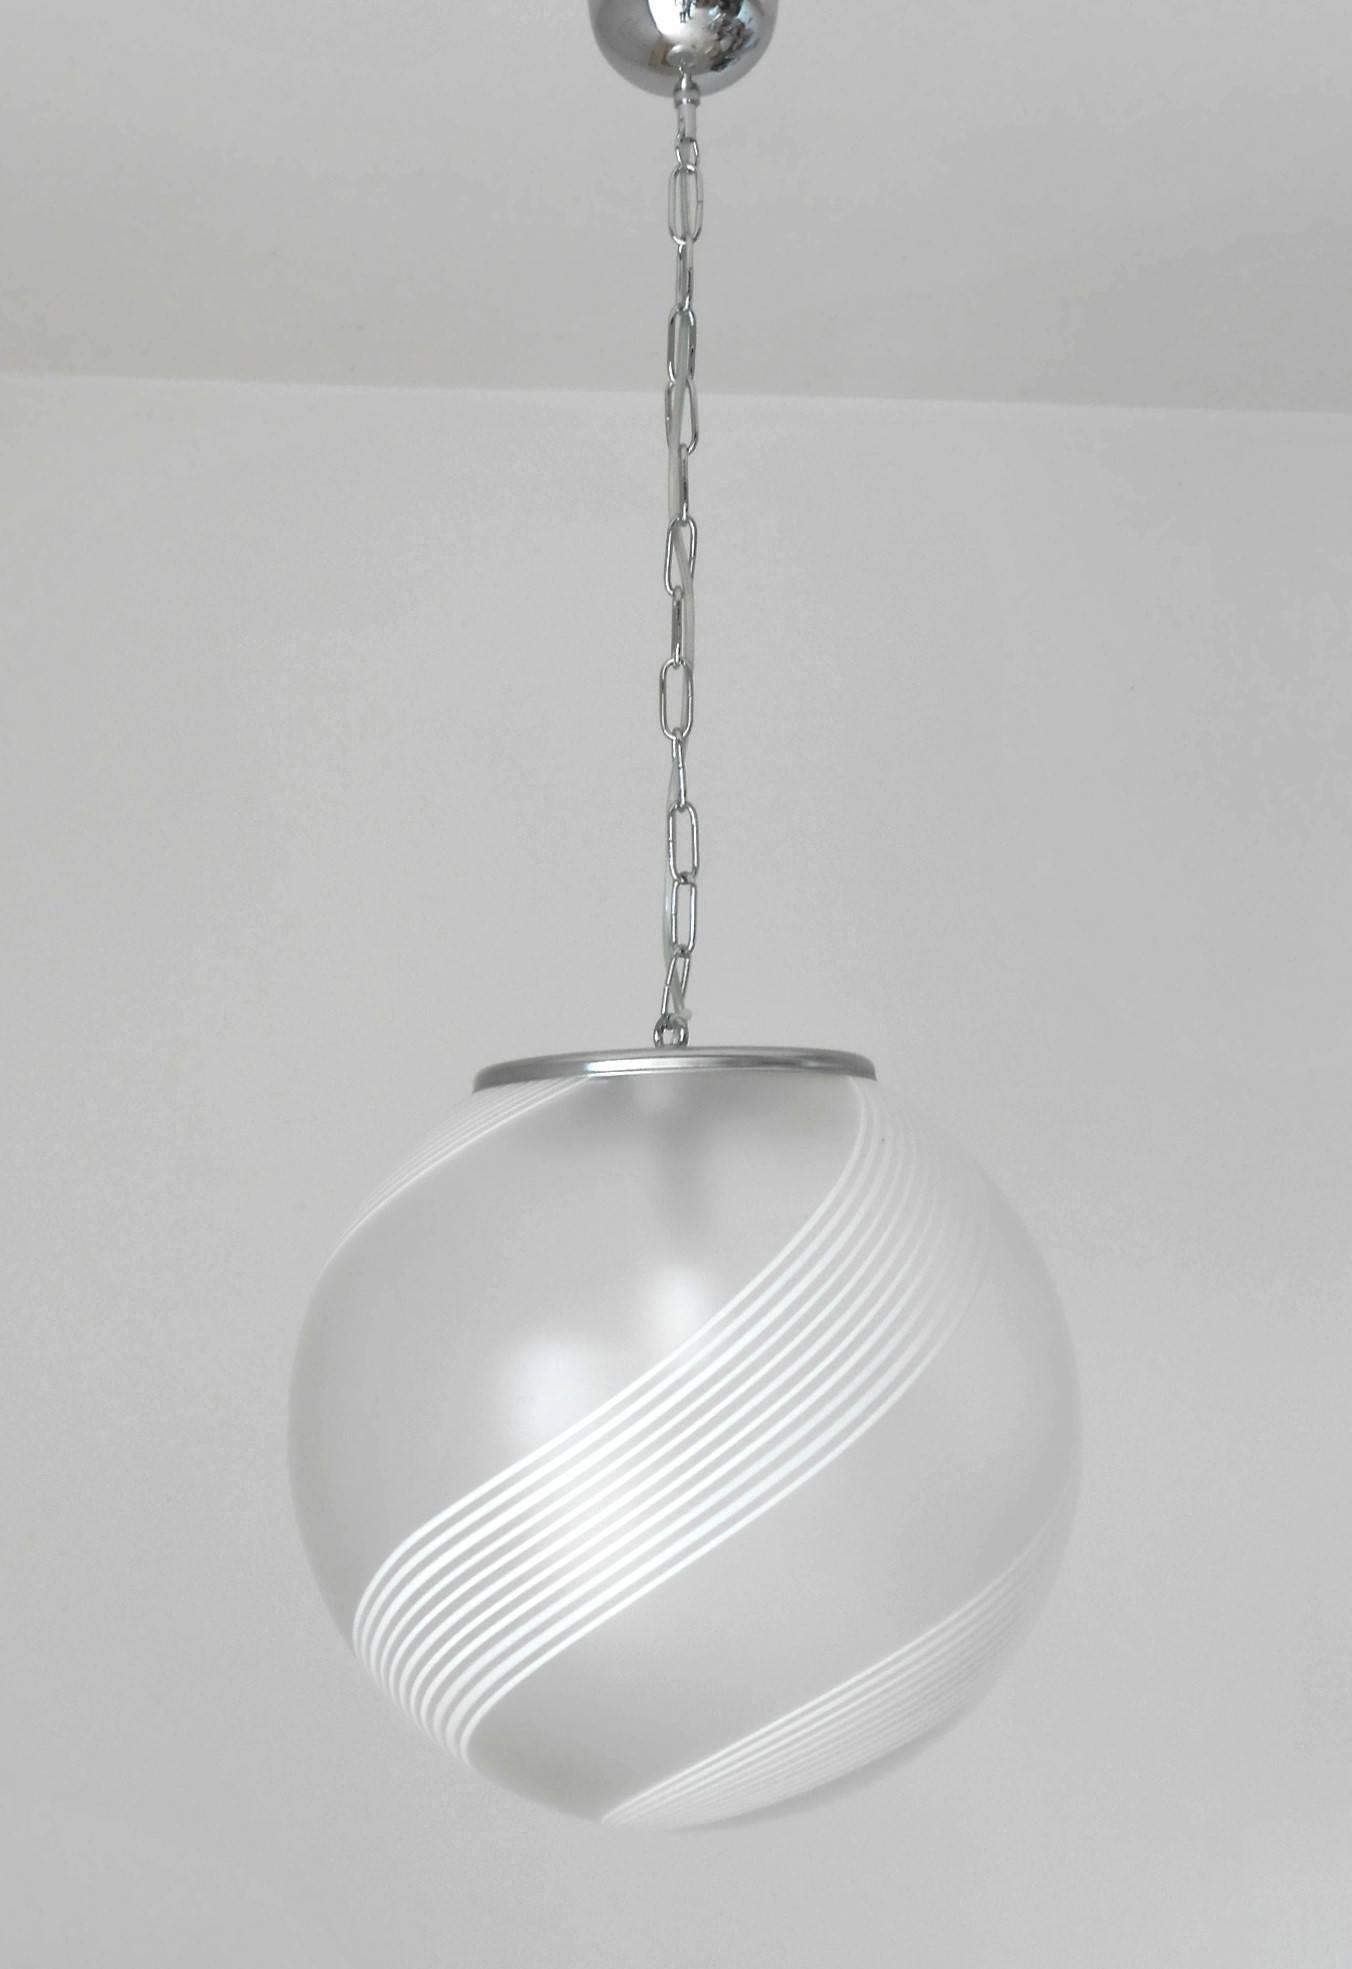 Vintage Italian pendant with frosted Murano glass globe with hand blown white Murano glass stripes, mounted on chrome hardware / Designed by Venini circa 1960’s / Made in Italy
1 light / E26 or E27 type / max 60W 
Diameter: 16 inches / Height: 16